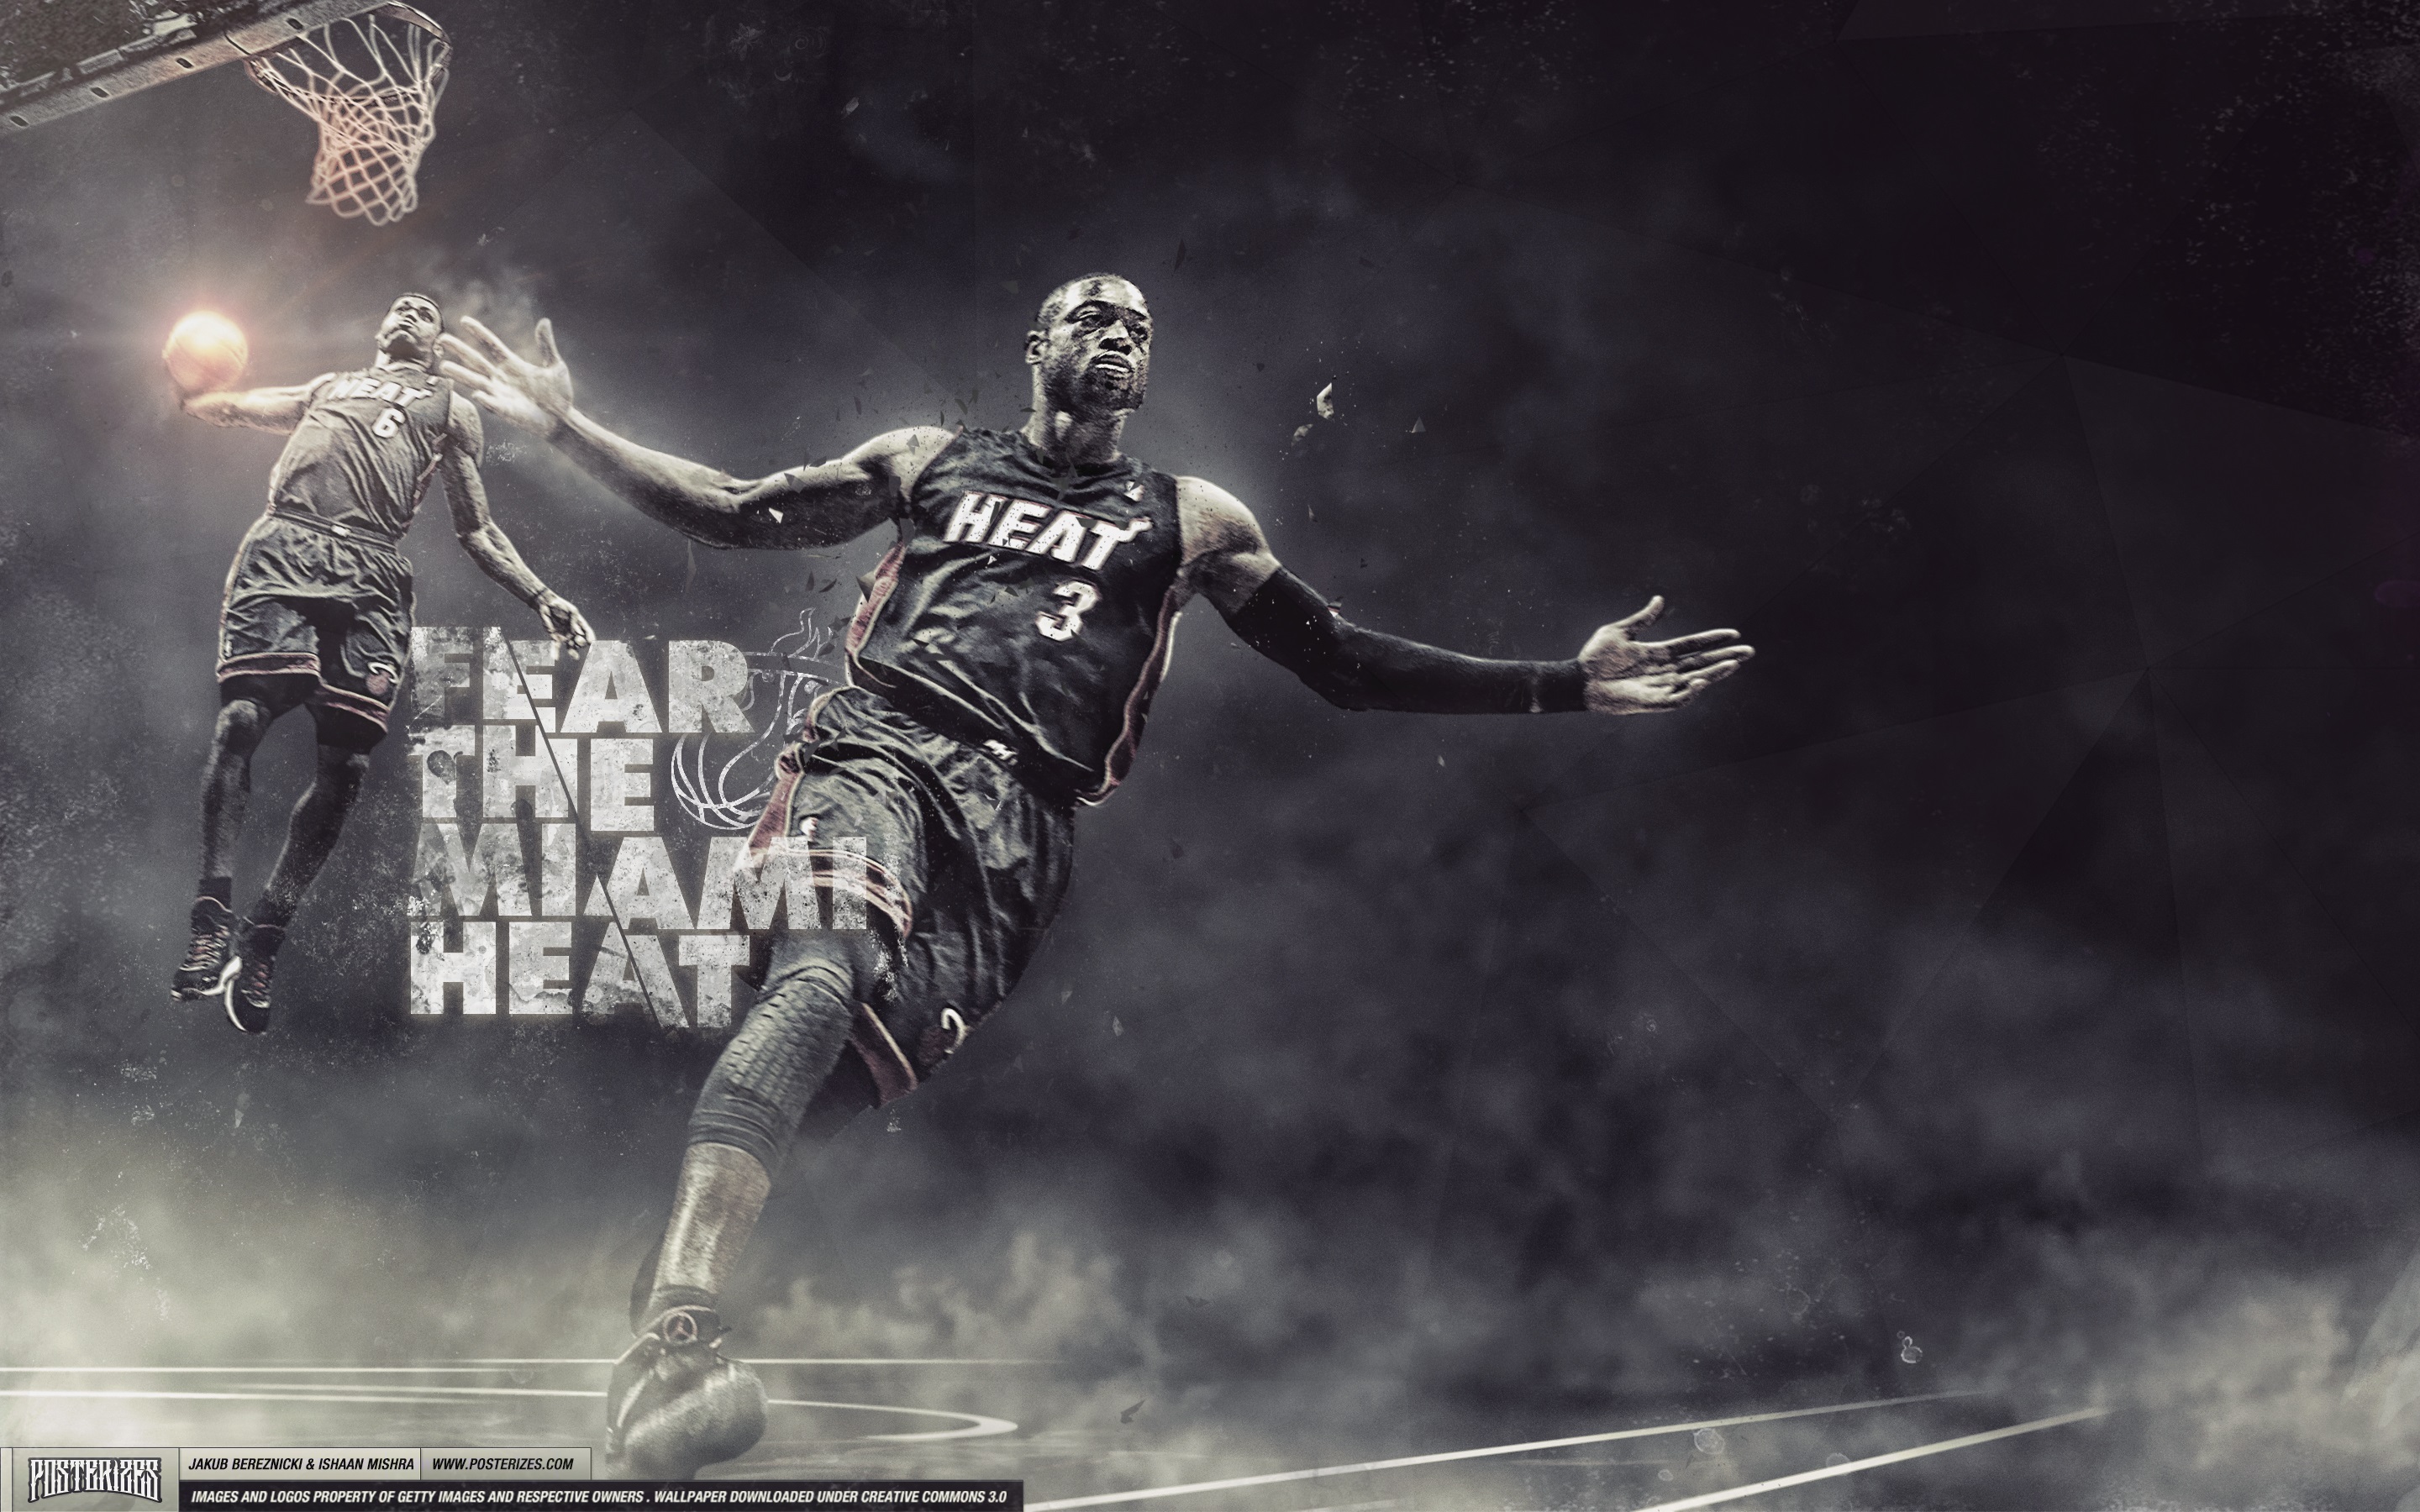 Free Download Miami Heat Wallpaper By Ishaanmishra 2880x1800 For Your Desktop Mobile Tablet Explore 49 Miami Heat 2015 Wallpapers Lebron James Wallpaper Miami Heat Miami Heat Background Wallpaper Heat Wallpaper 2014